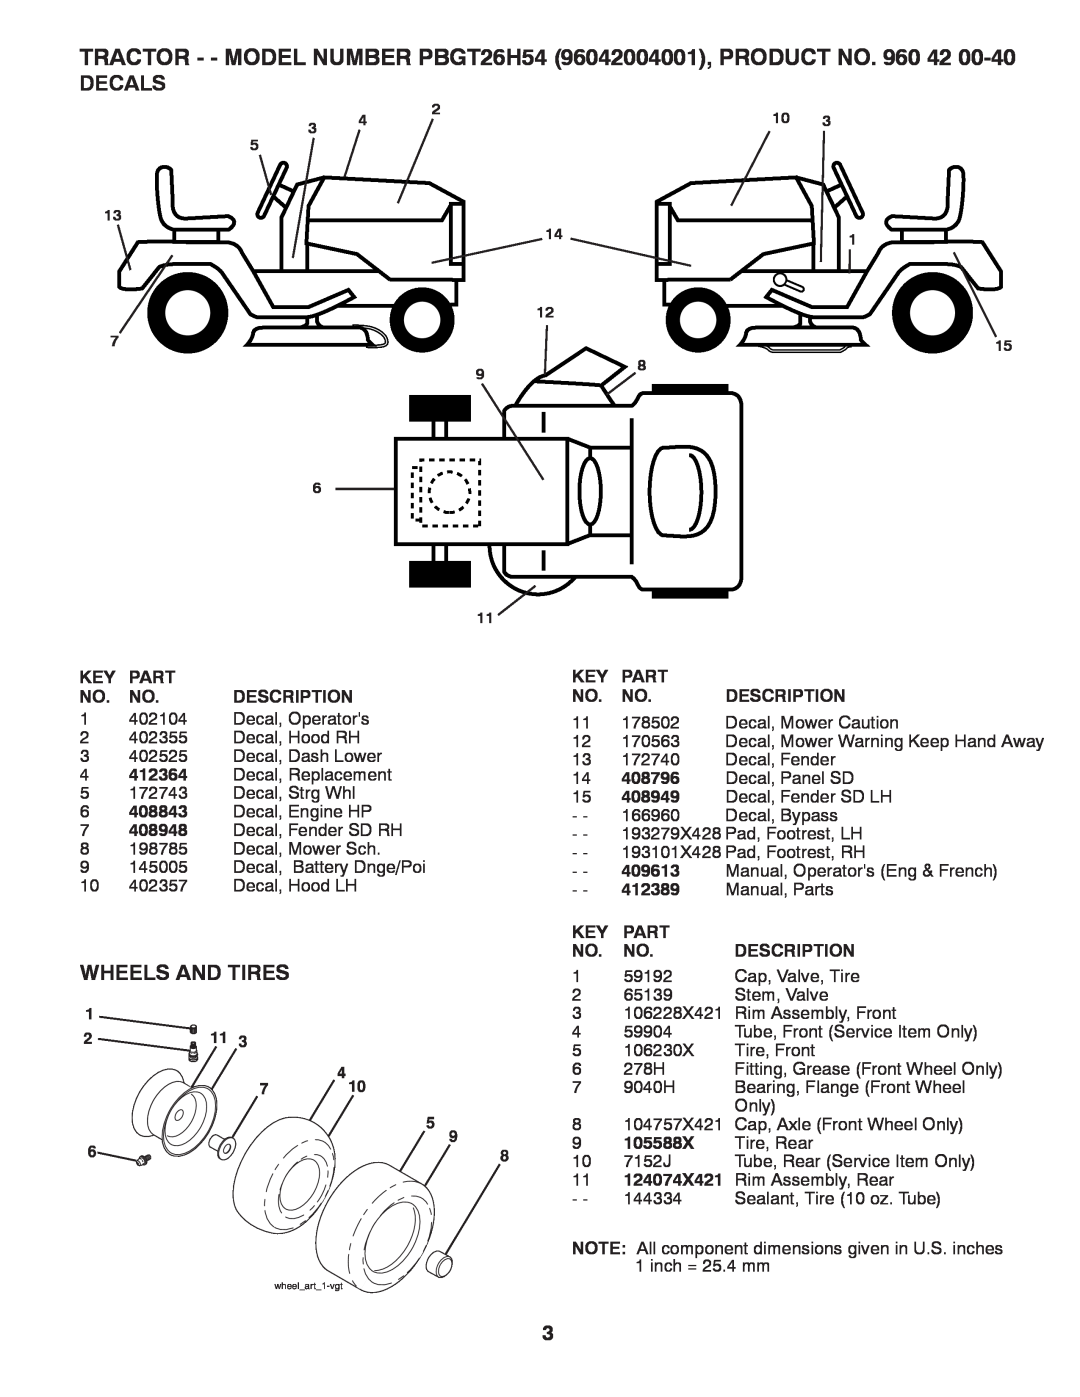 Poulan 960 42 00-40 manual Decals, Wheels And Tires, TRACTOR - - MODEL NUMBER PBGT26H54 96042004001, PRODUCT NO 